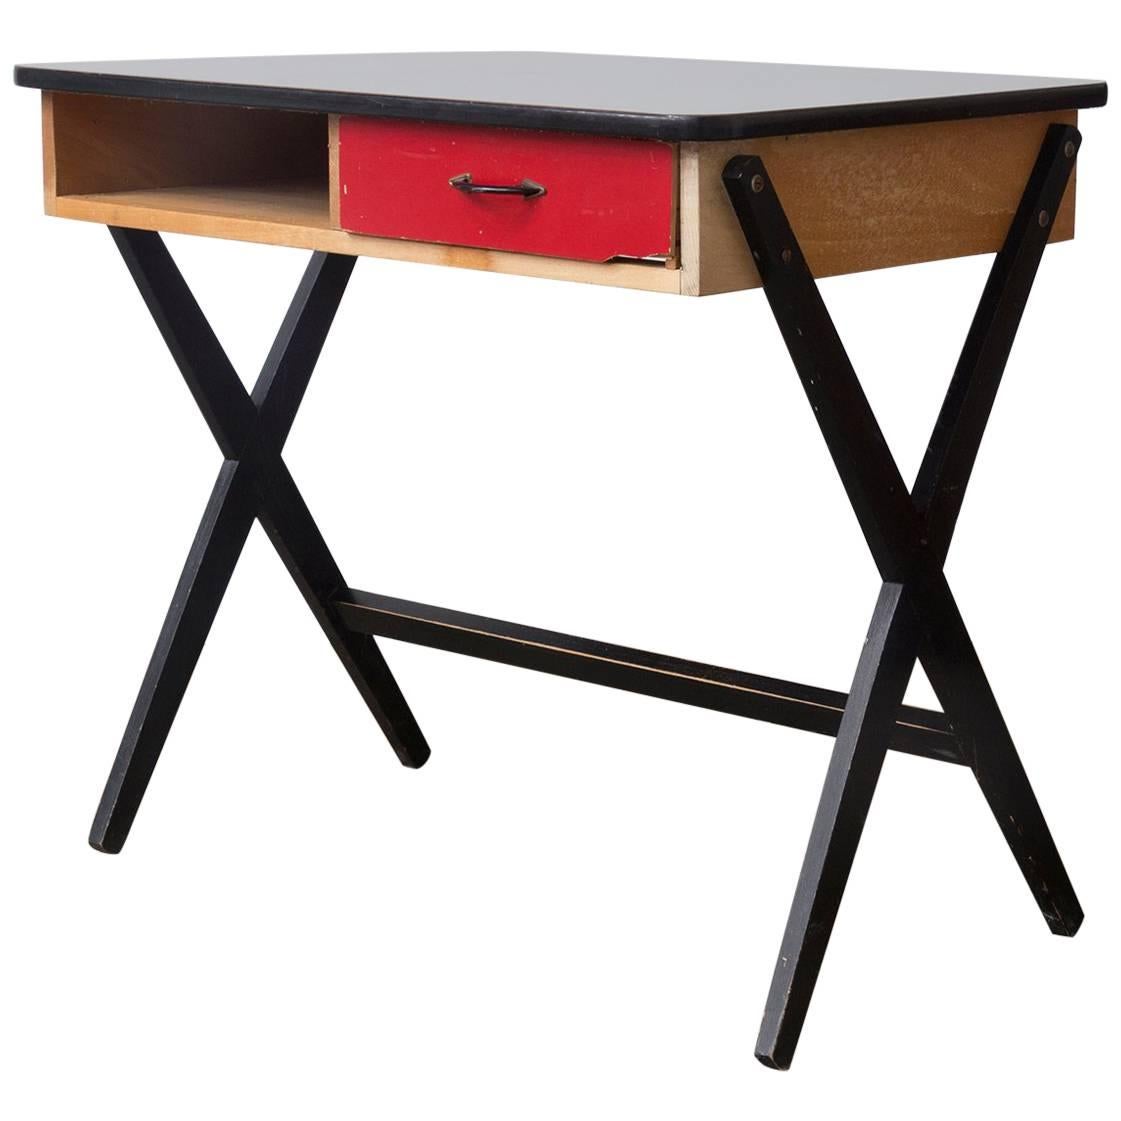 1954, Coen de Vries for Devo Wooden Writing Desk with Red Drawer and Formica Top